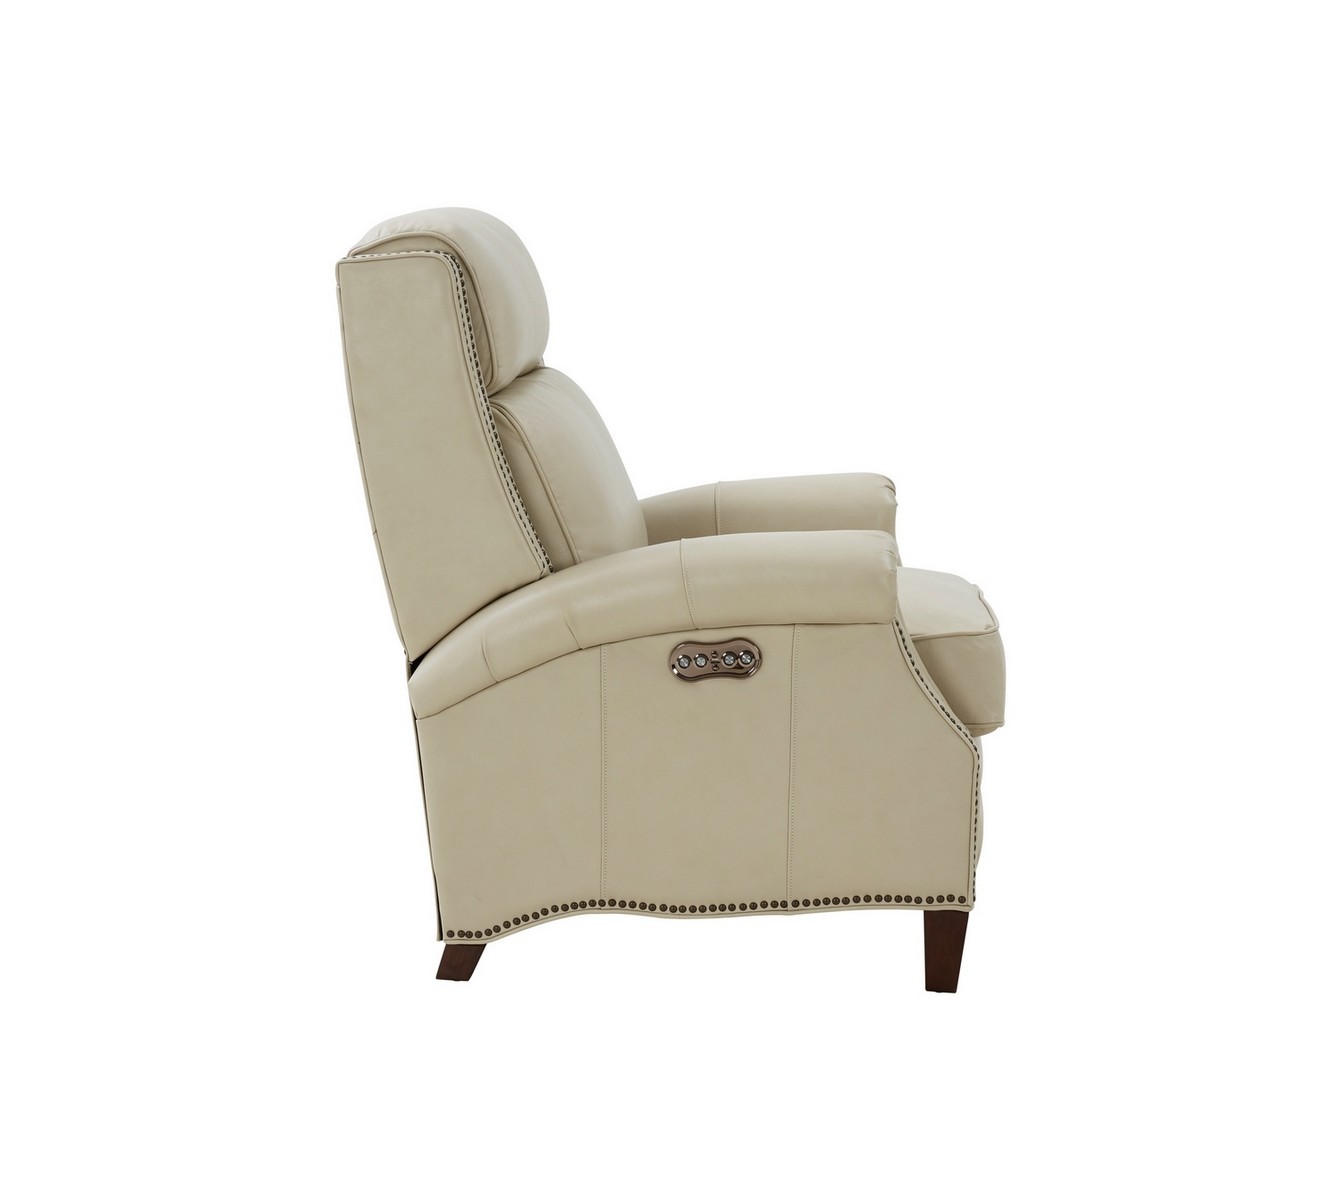 Barcalounger Barrett Power Recliner Chair with Power Head Rest - Barone Parchment/All Leather